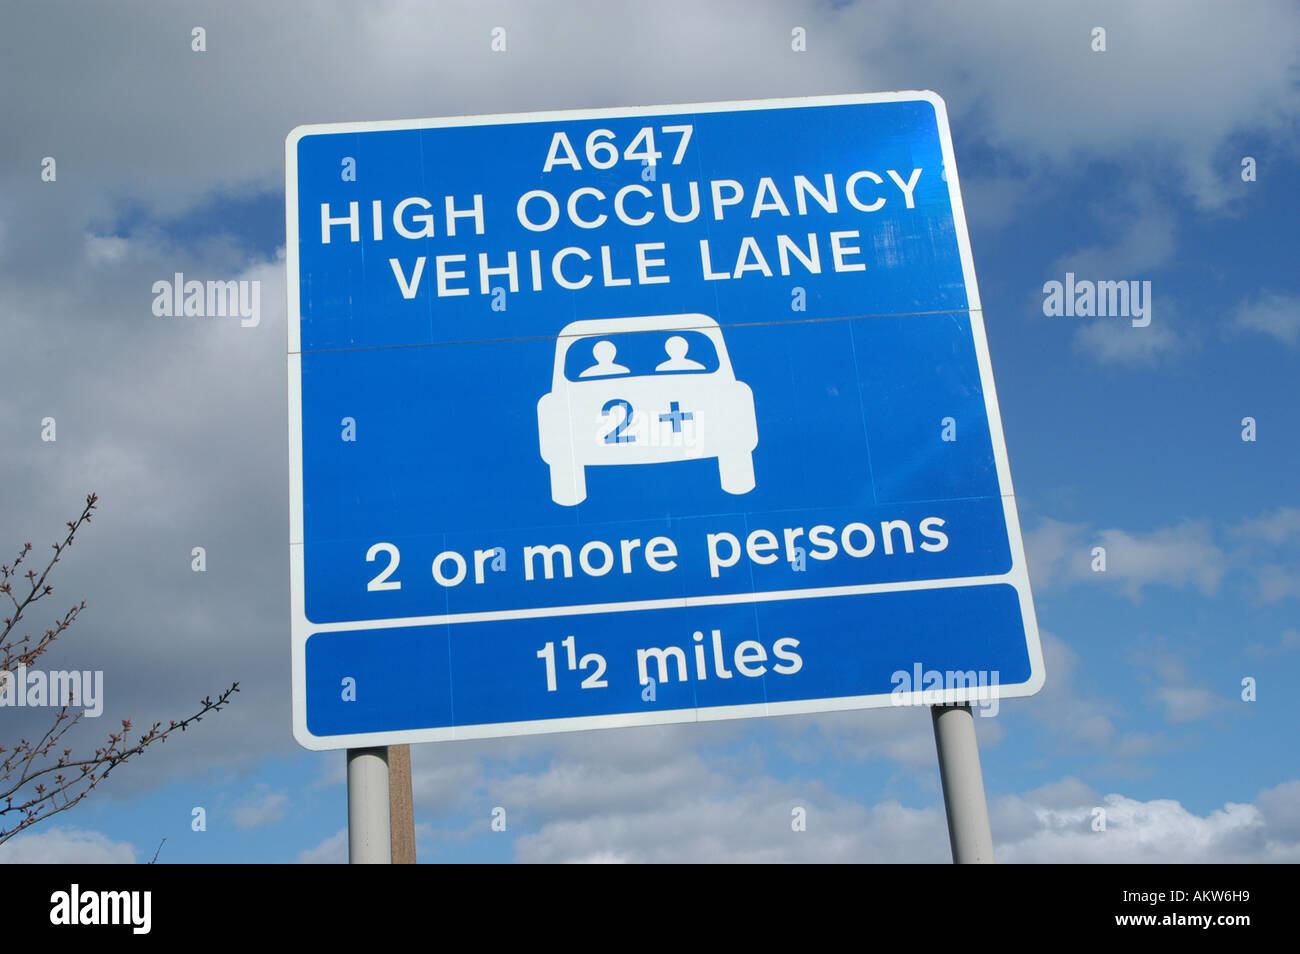 High occupancy vehicle lane to encourage car sharing in Leeds Yorkshire England Stock Photo